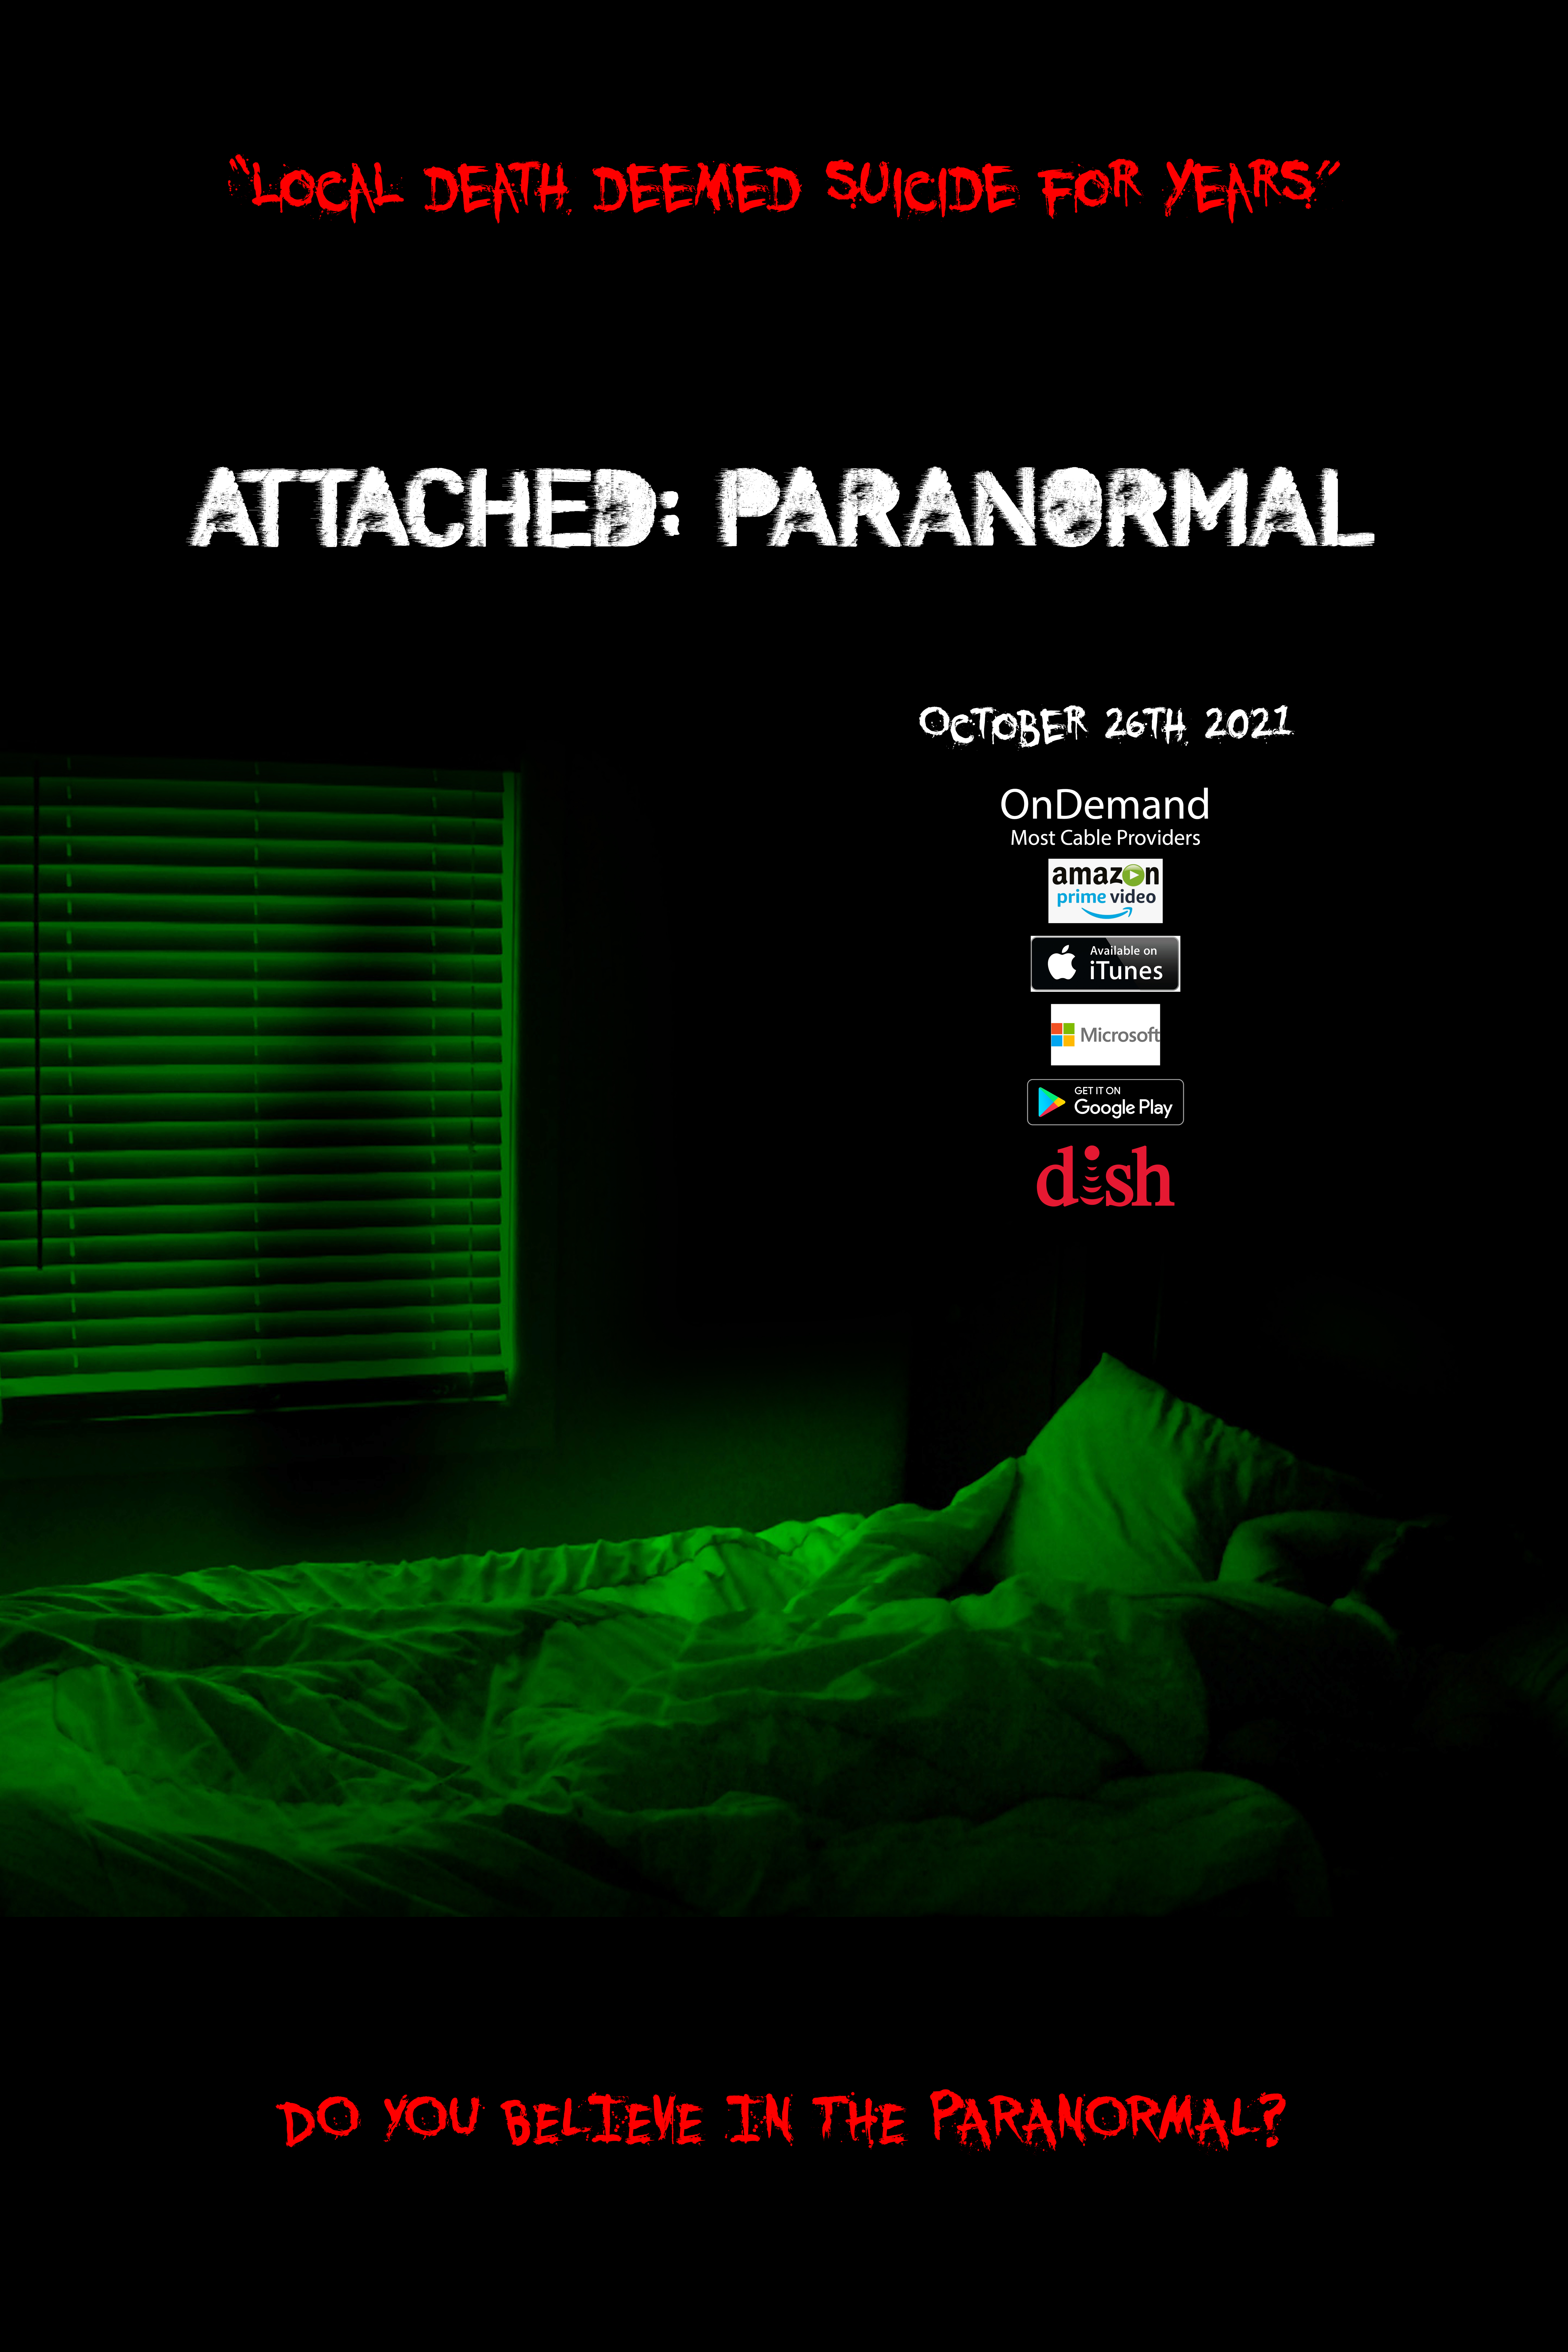 Rob Jankowski’s Highly Anticipated New Film "Attached: Paranormal" Available October 26th, 2021 